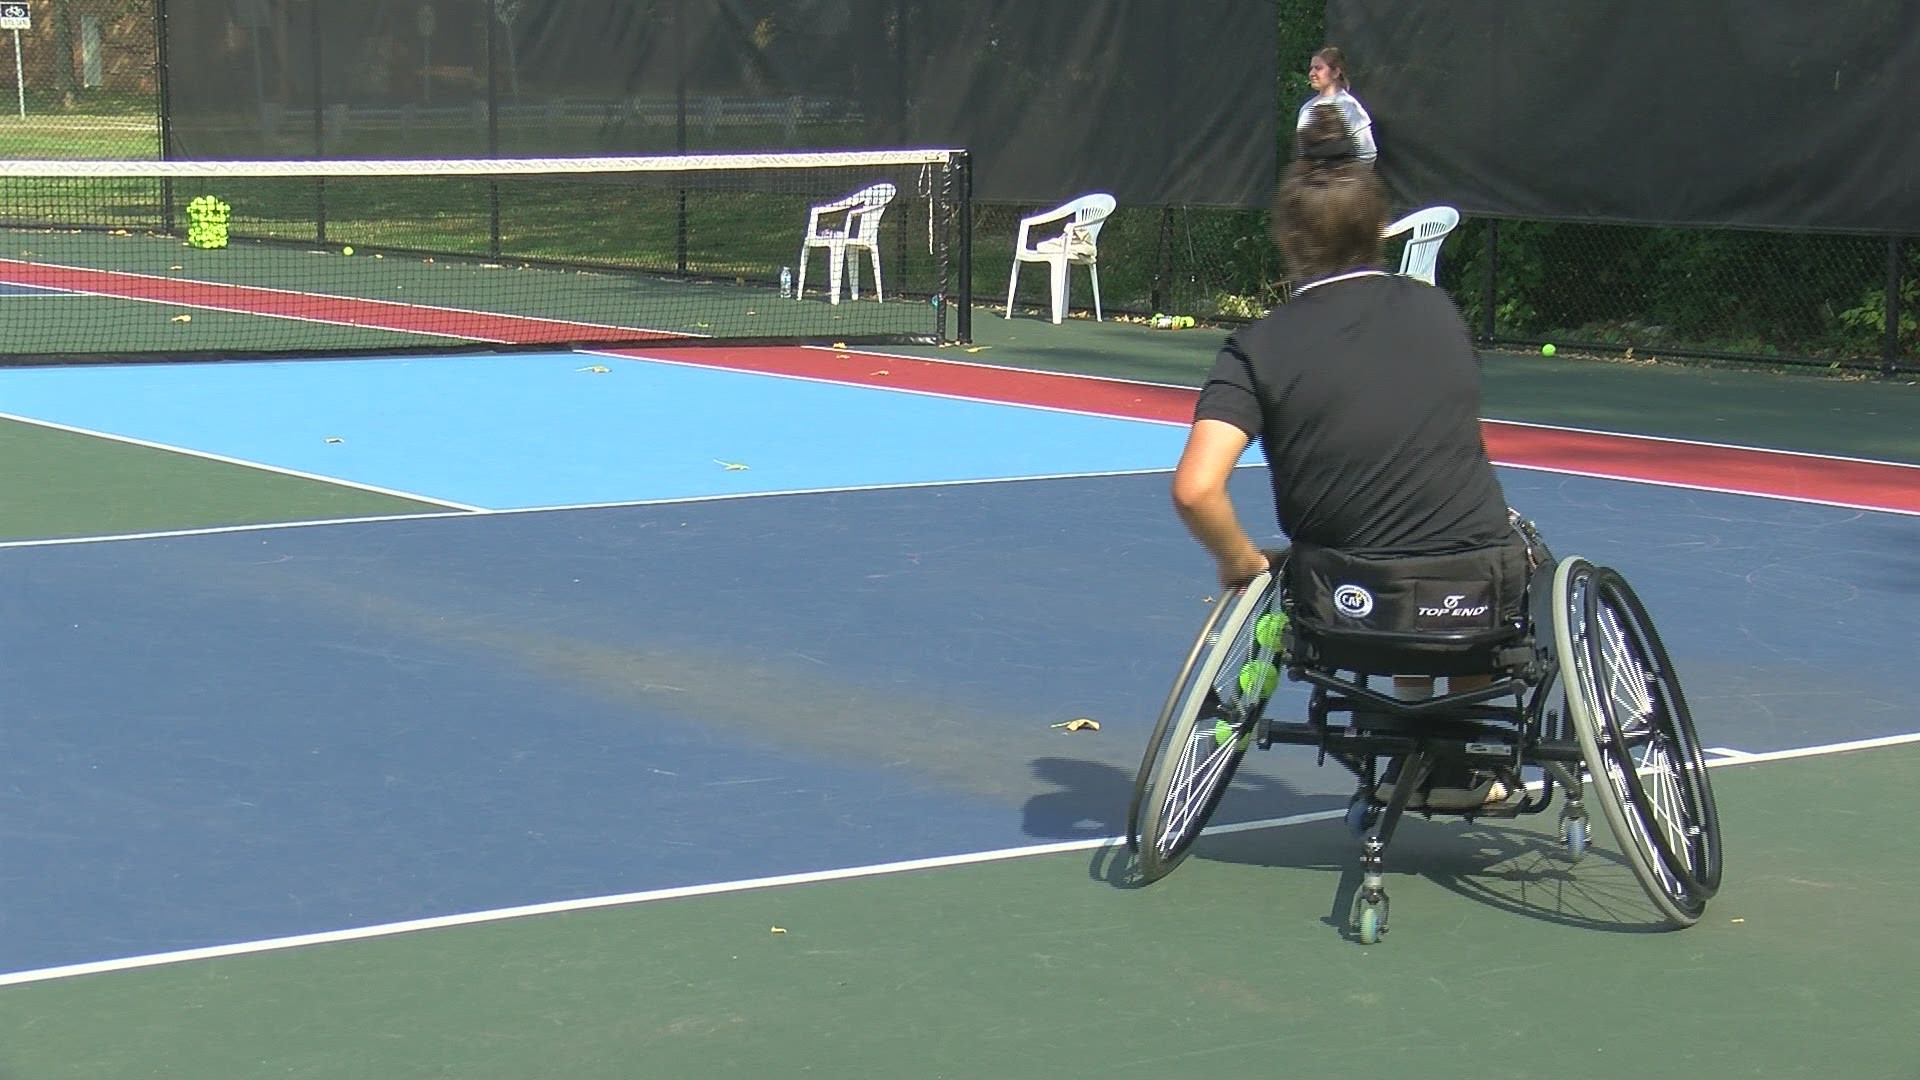 The adaptive sports program allows everyone to participate and have a great time. Bringing wheelchair tennis to the area helped fill a need.